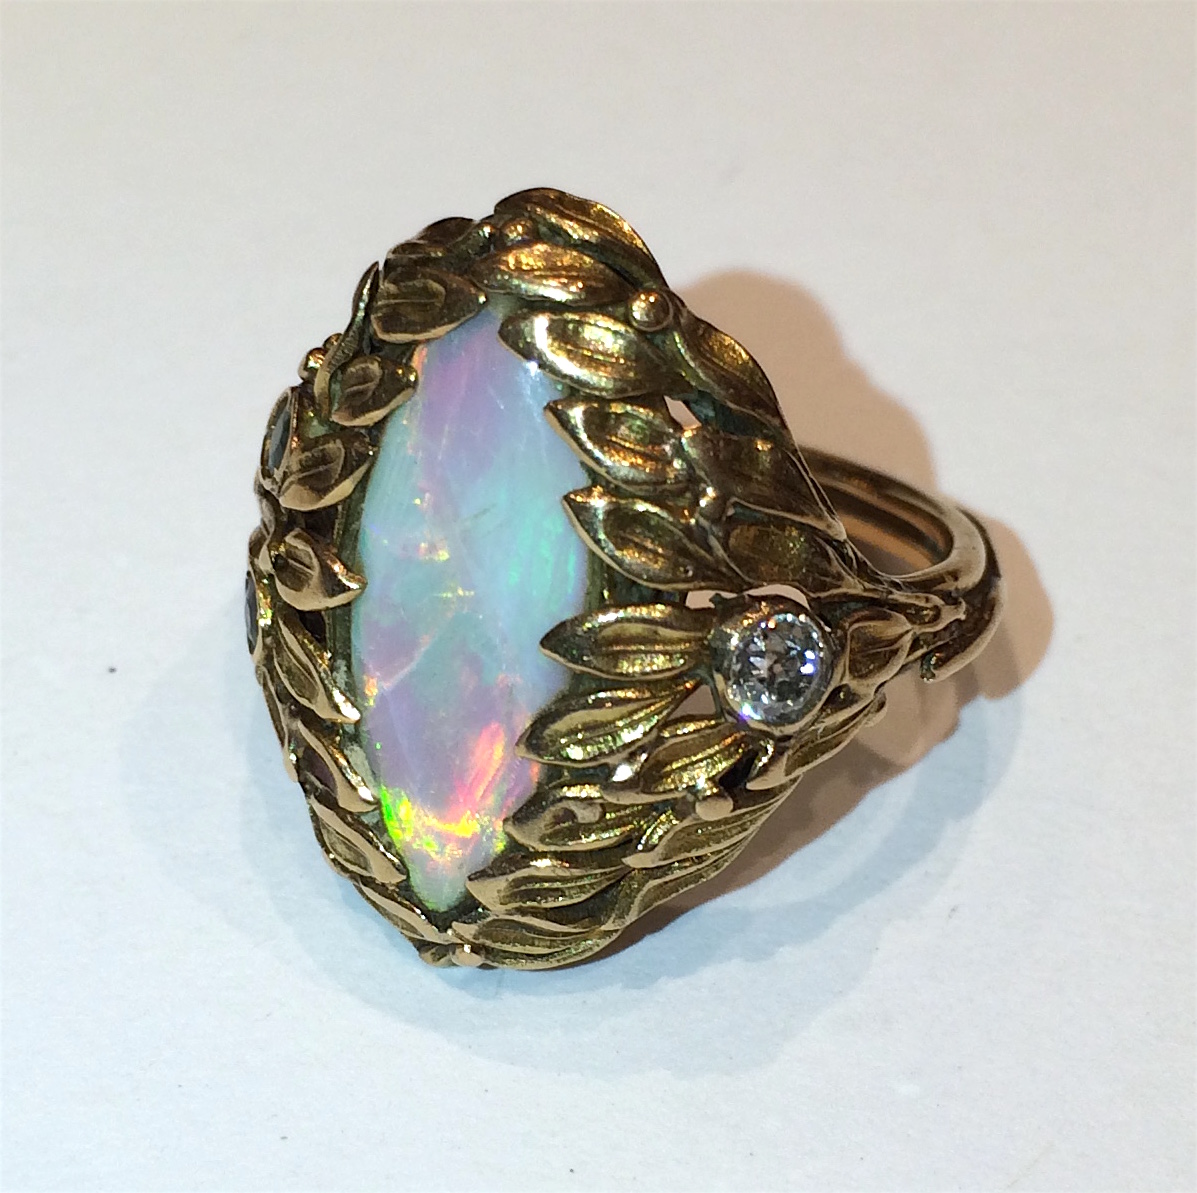 American Arts & Craft “Stylized Leaf” ring, 18K gold set with two demantoid garnets, a diamond and a large marquee shaped cabochon fire opal, c. 1910